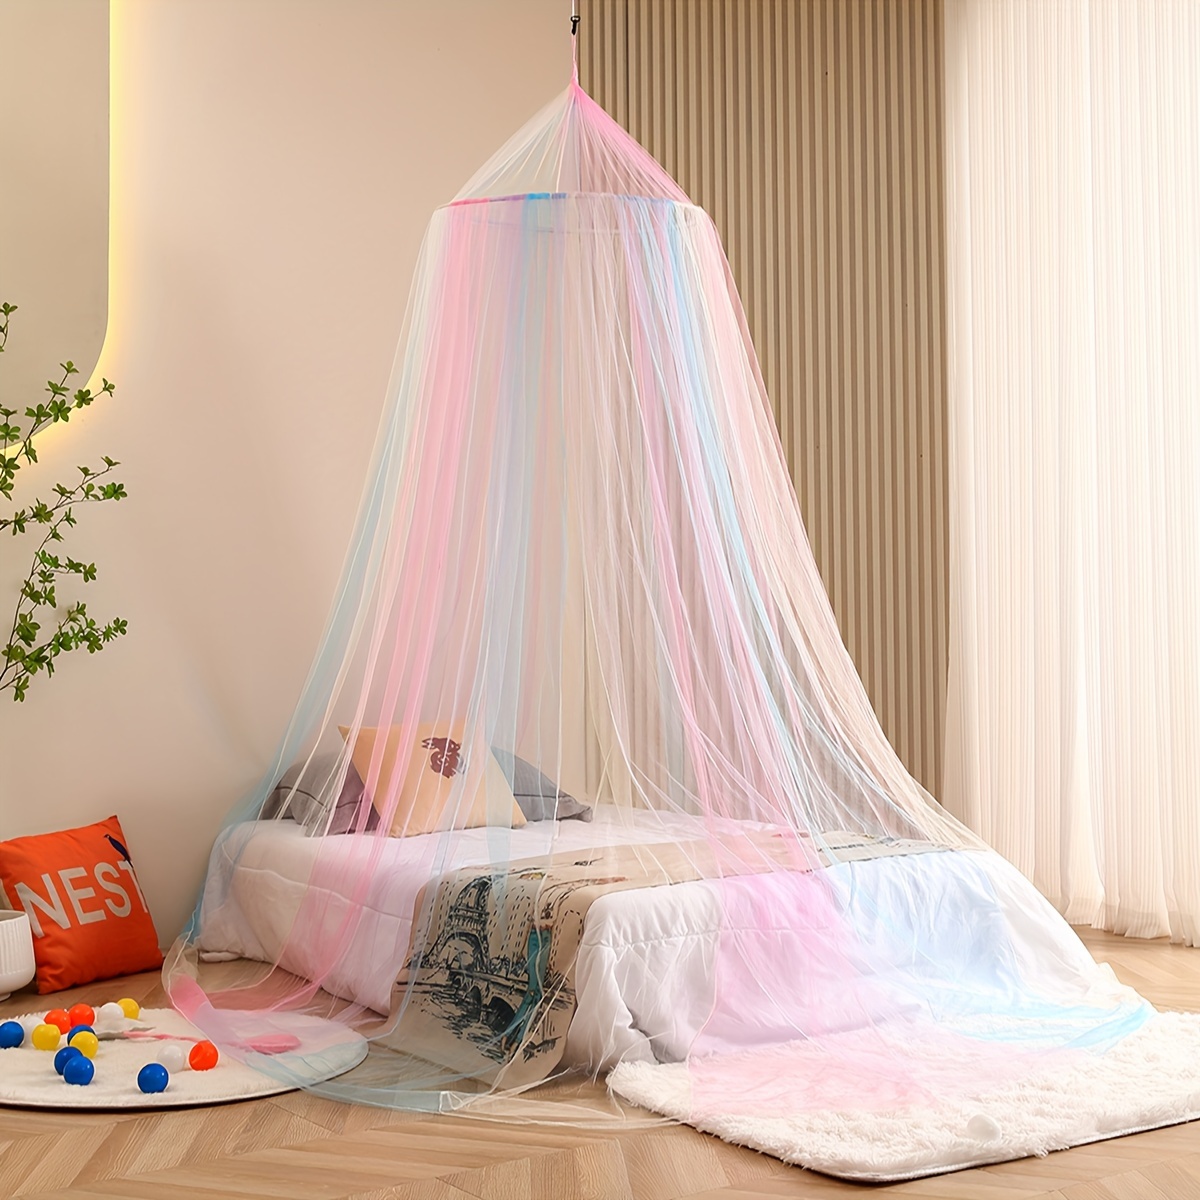 

1pc Rainbow Bed Canopy For Girls, Canopy Bed Curtains Mosquito Net Princess Room Decor, Hanging Net Canopy For Beds, Chairs & Reading Corners